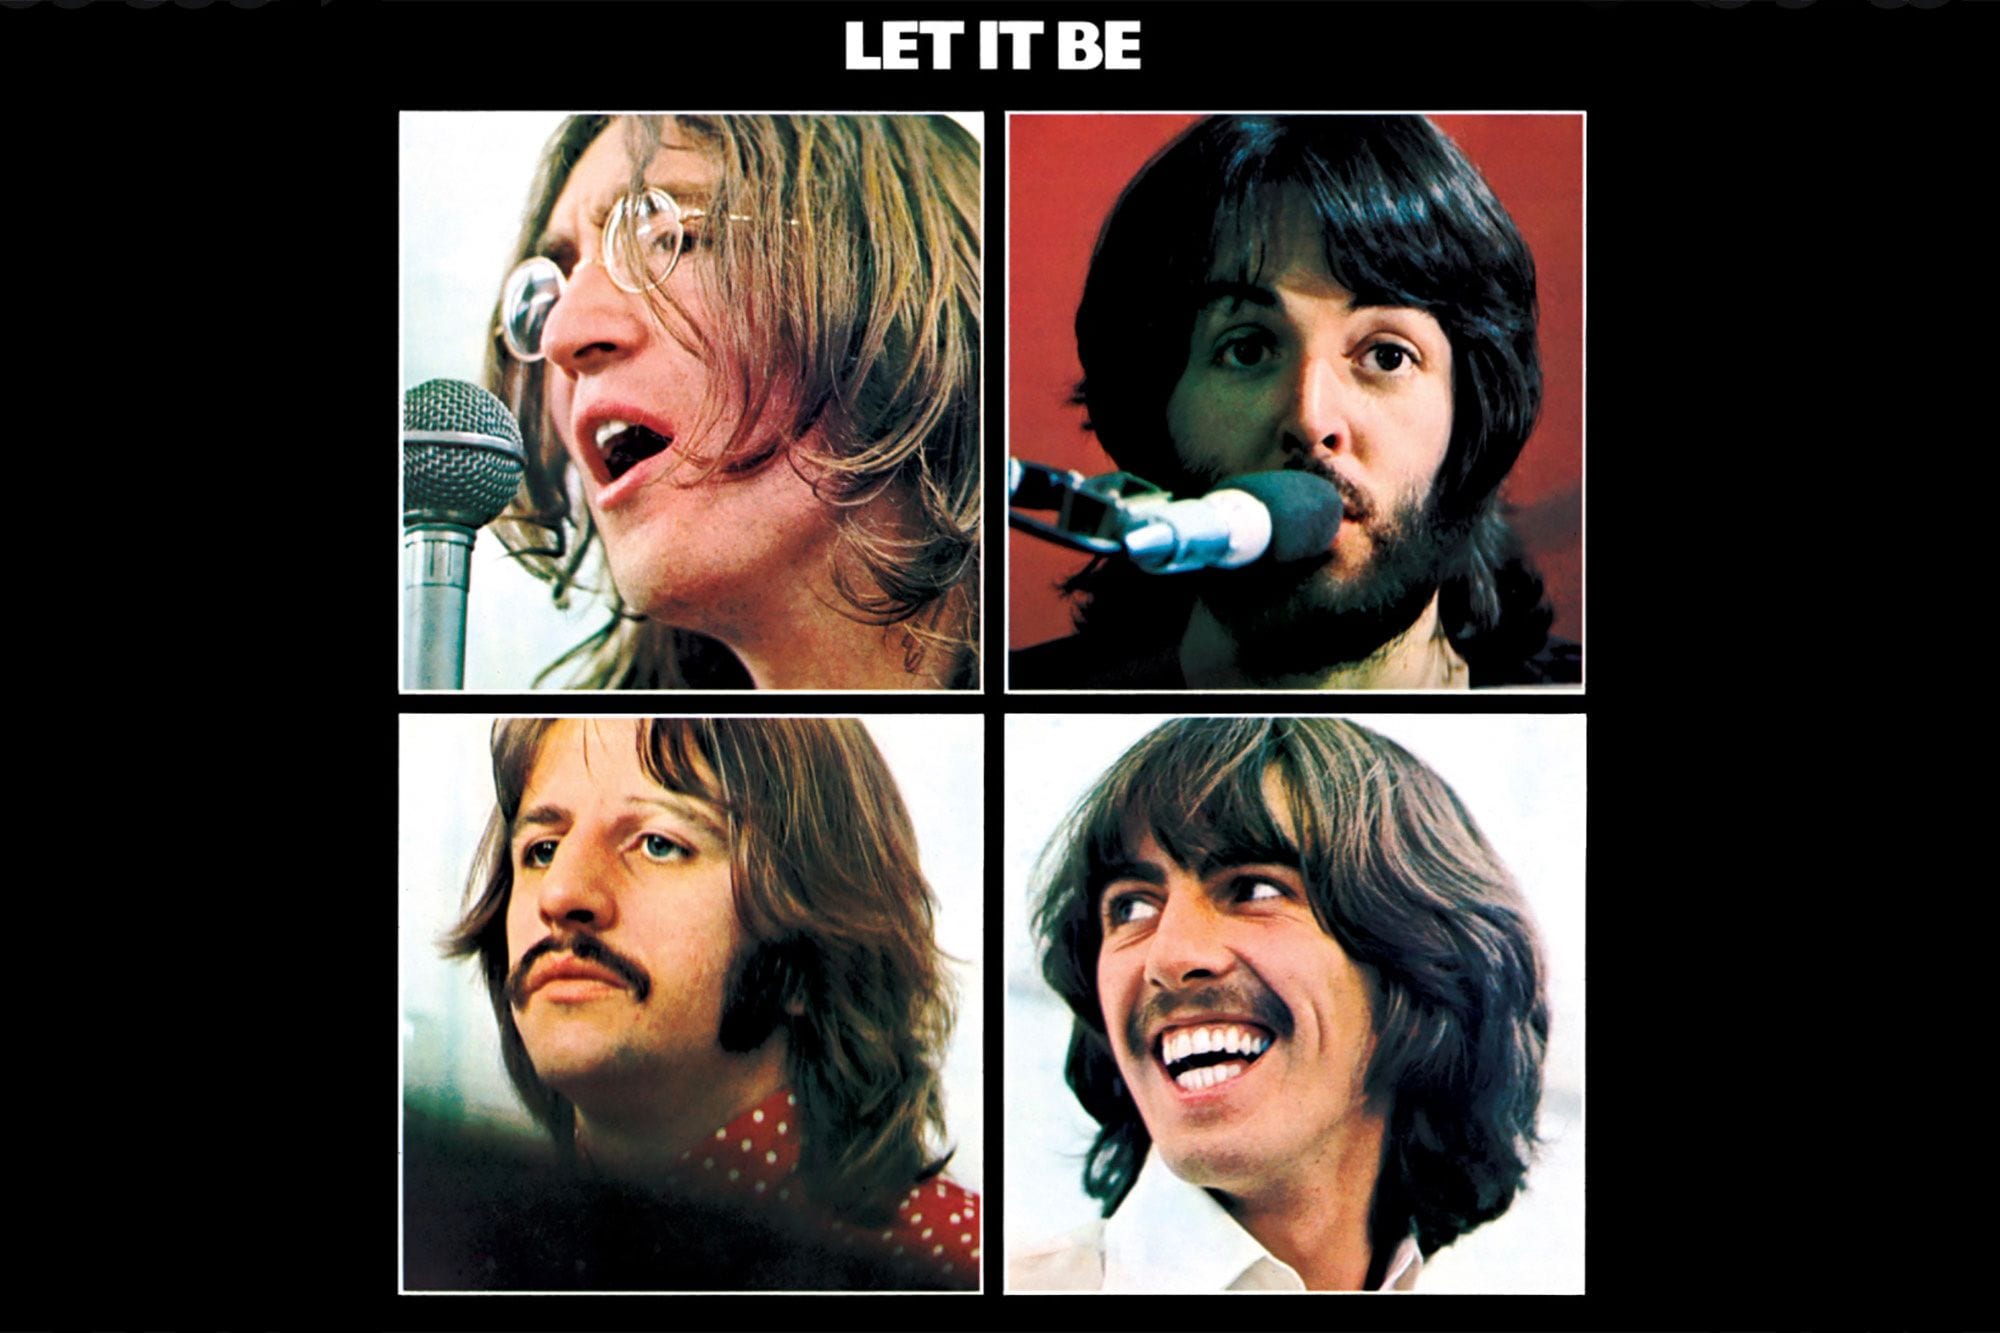 The Beatles ‘Let It Be’: So Good They Ruined It for Everyone